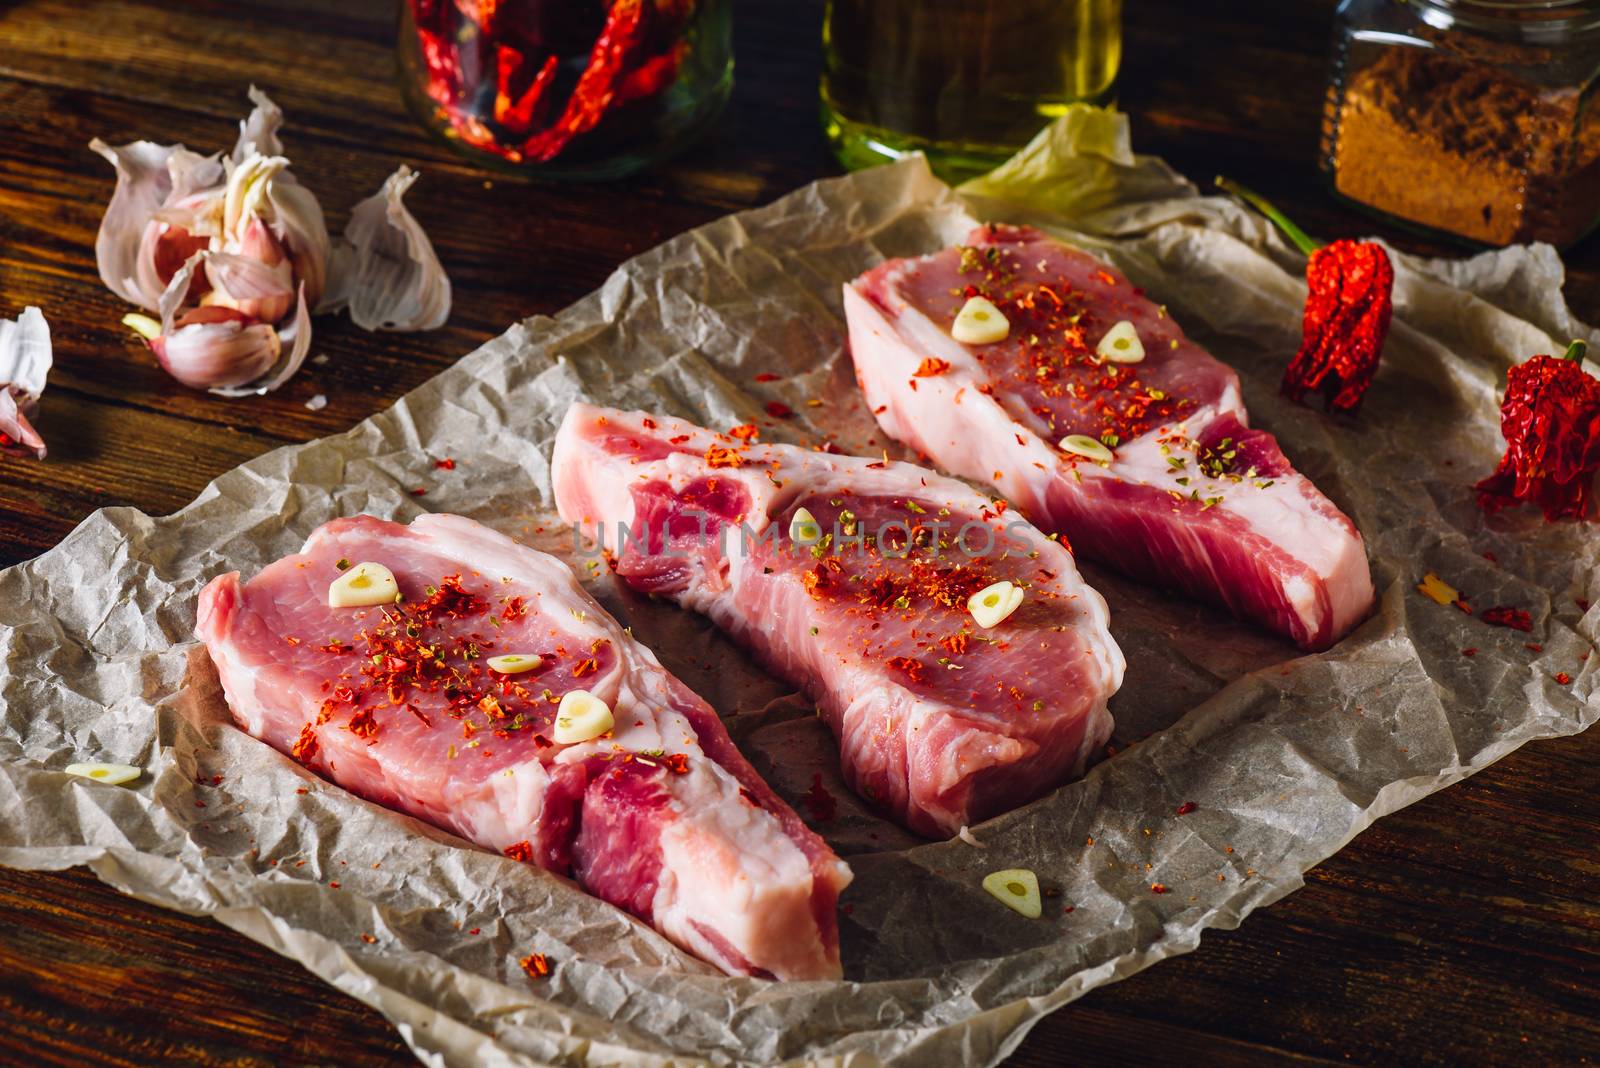 Pork Loin Steaks Prepared with Spices, Chili Pepper and Garlic.